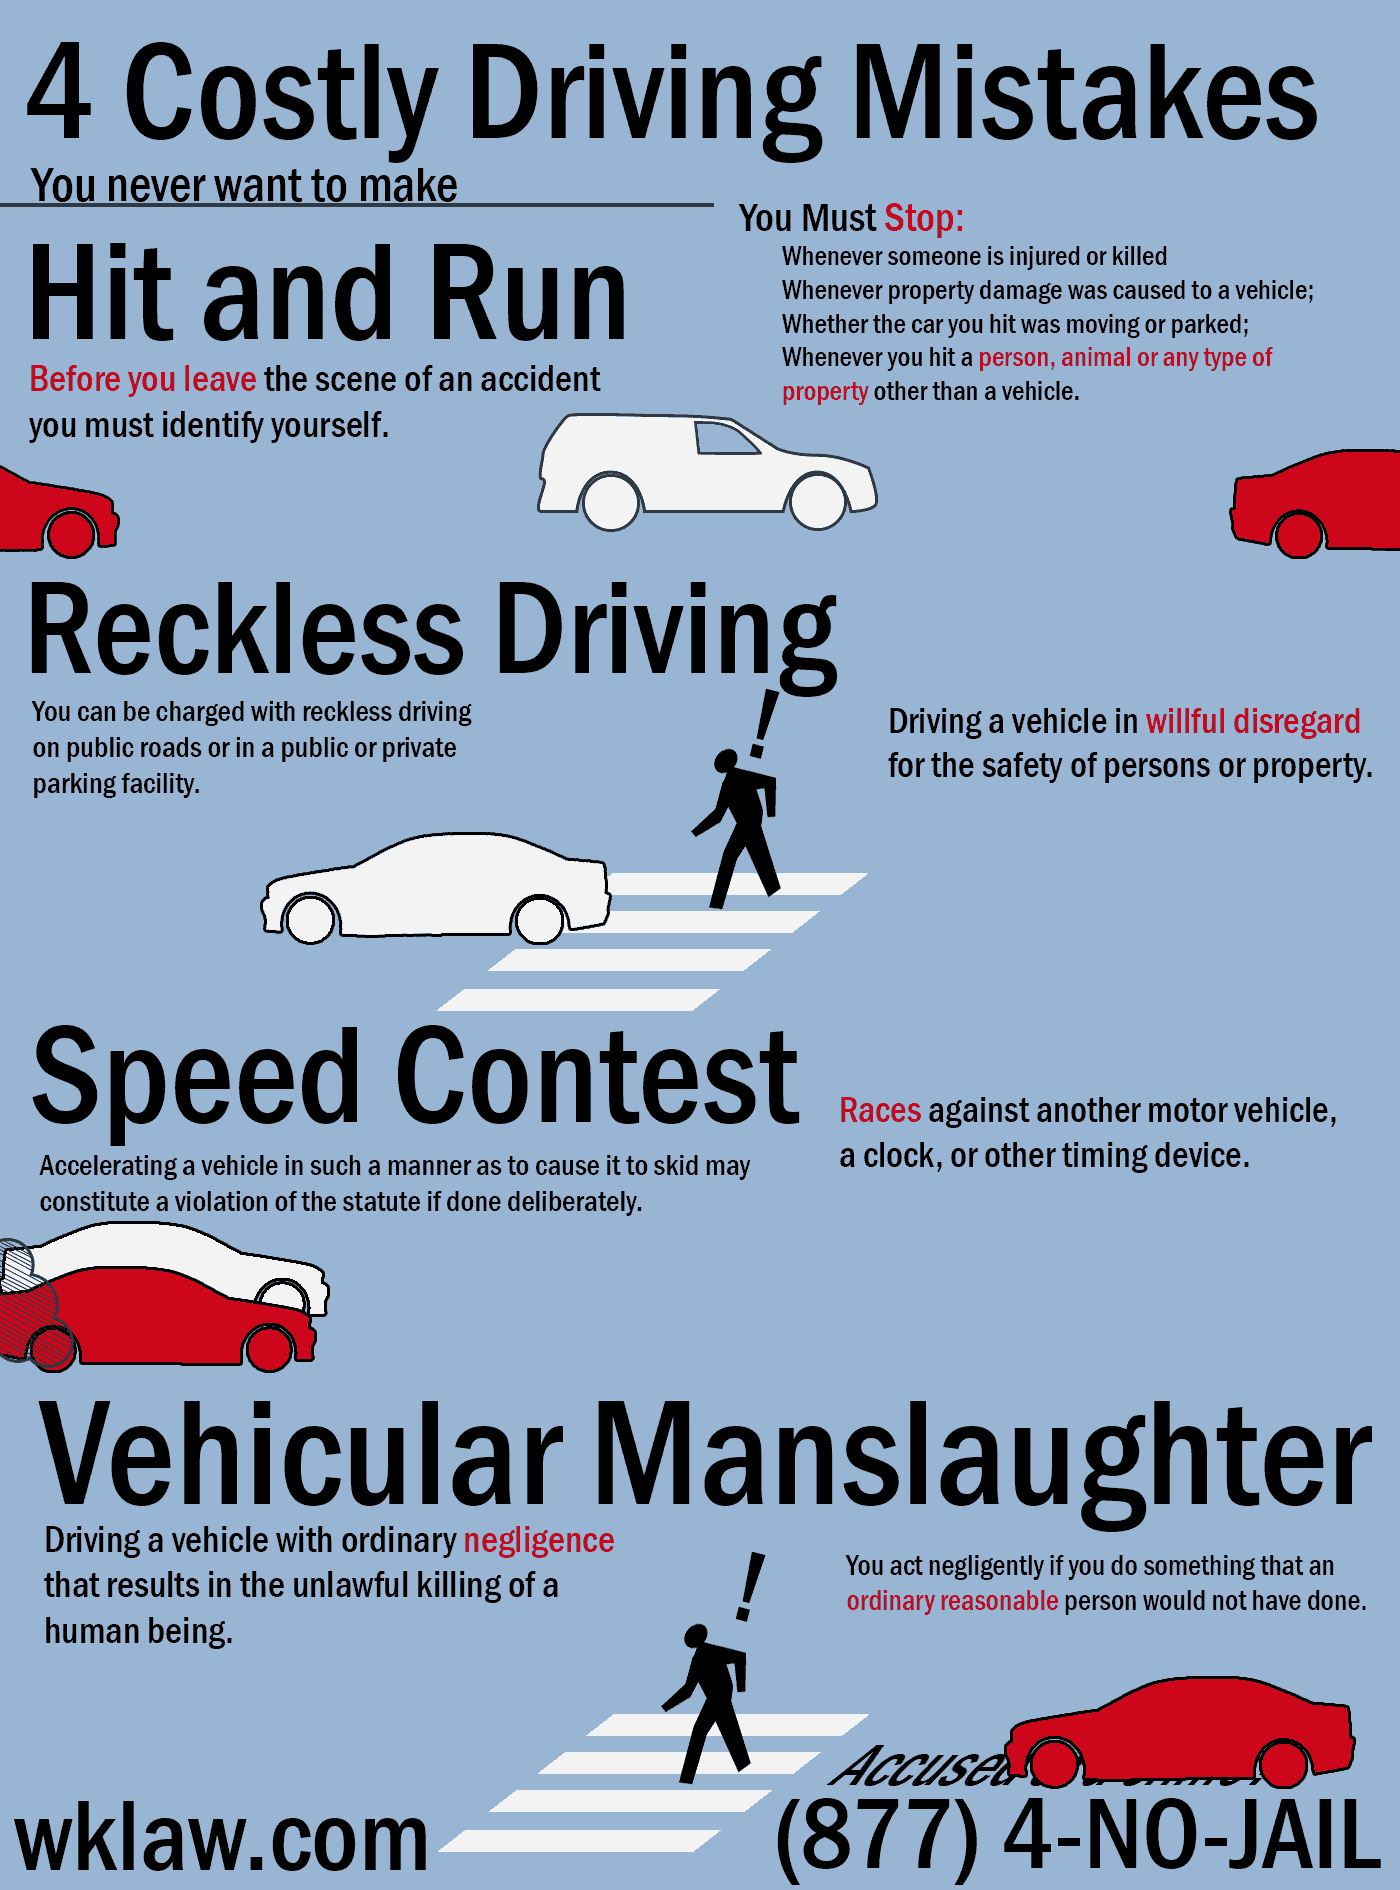 4 Costly Driving Mistakes You Never Want to Make Infographic